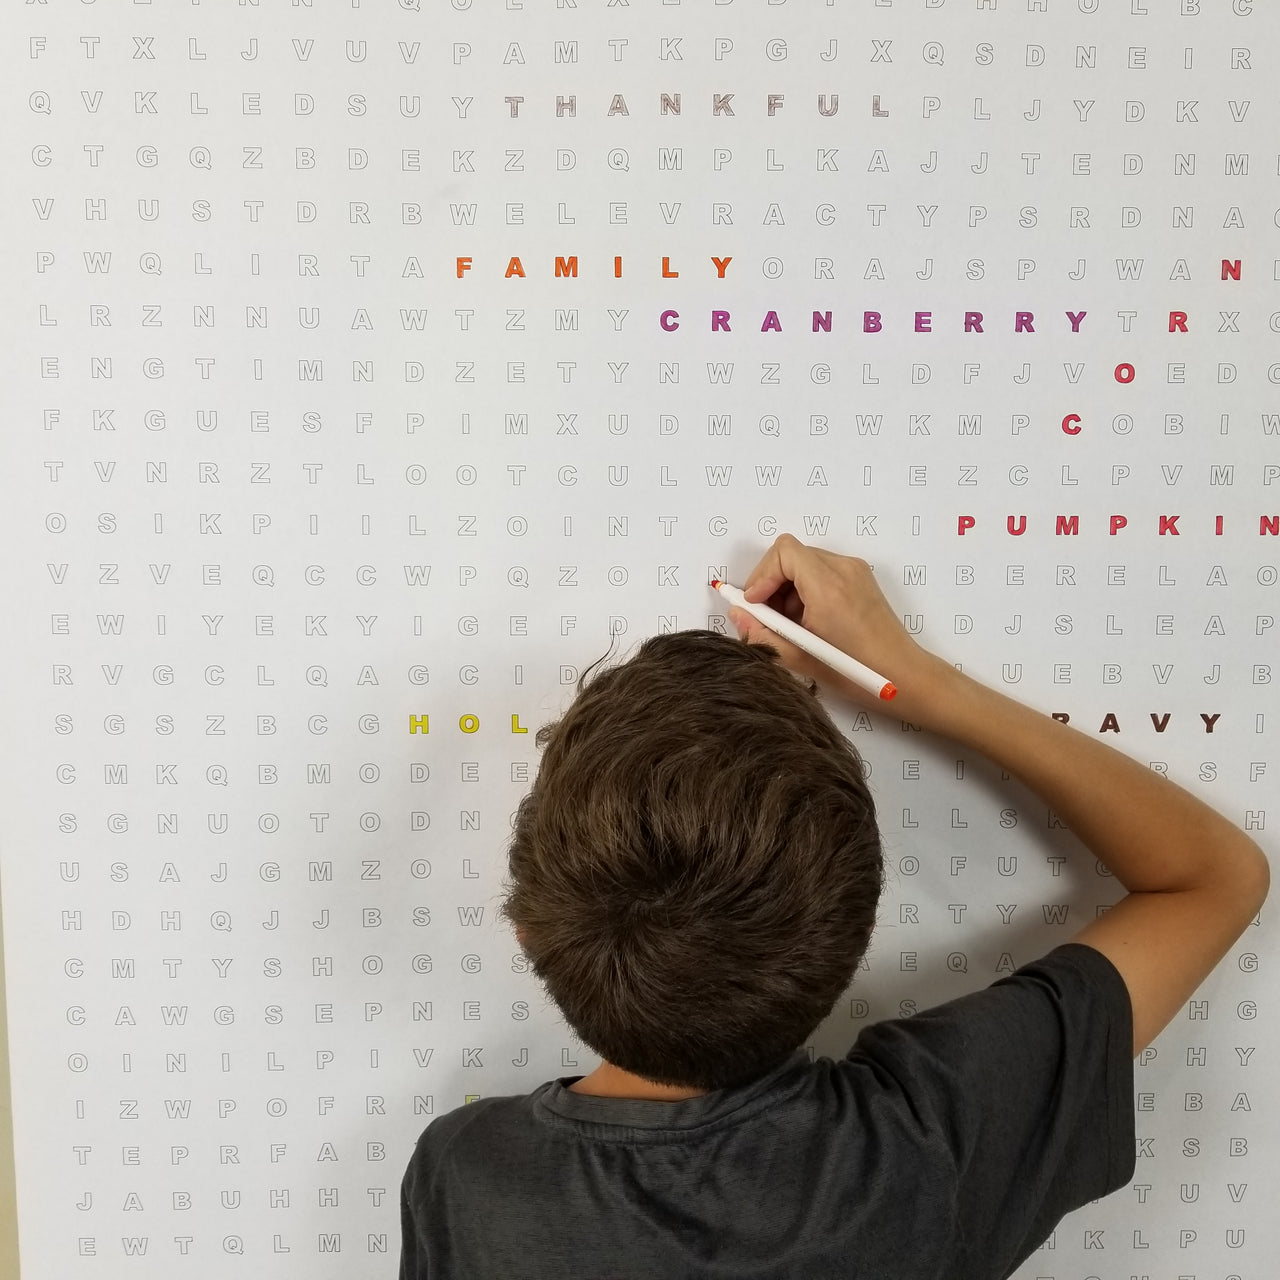 Bugs Giant Word Search Puzzle